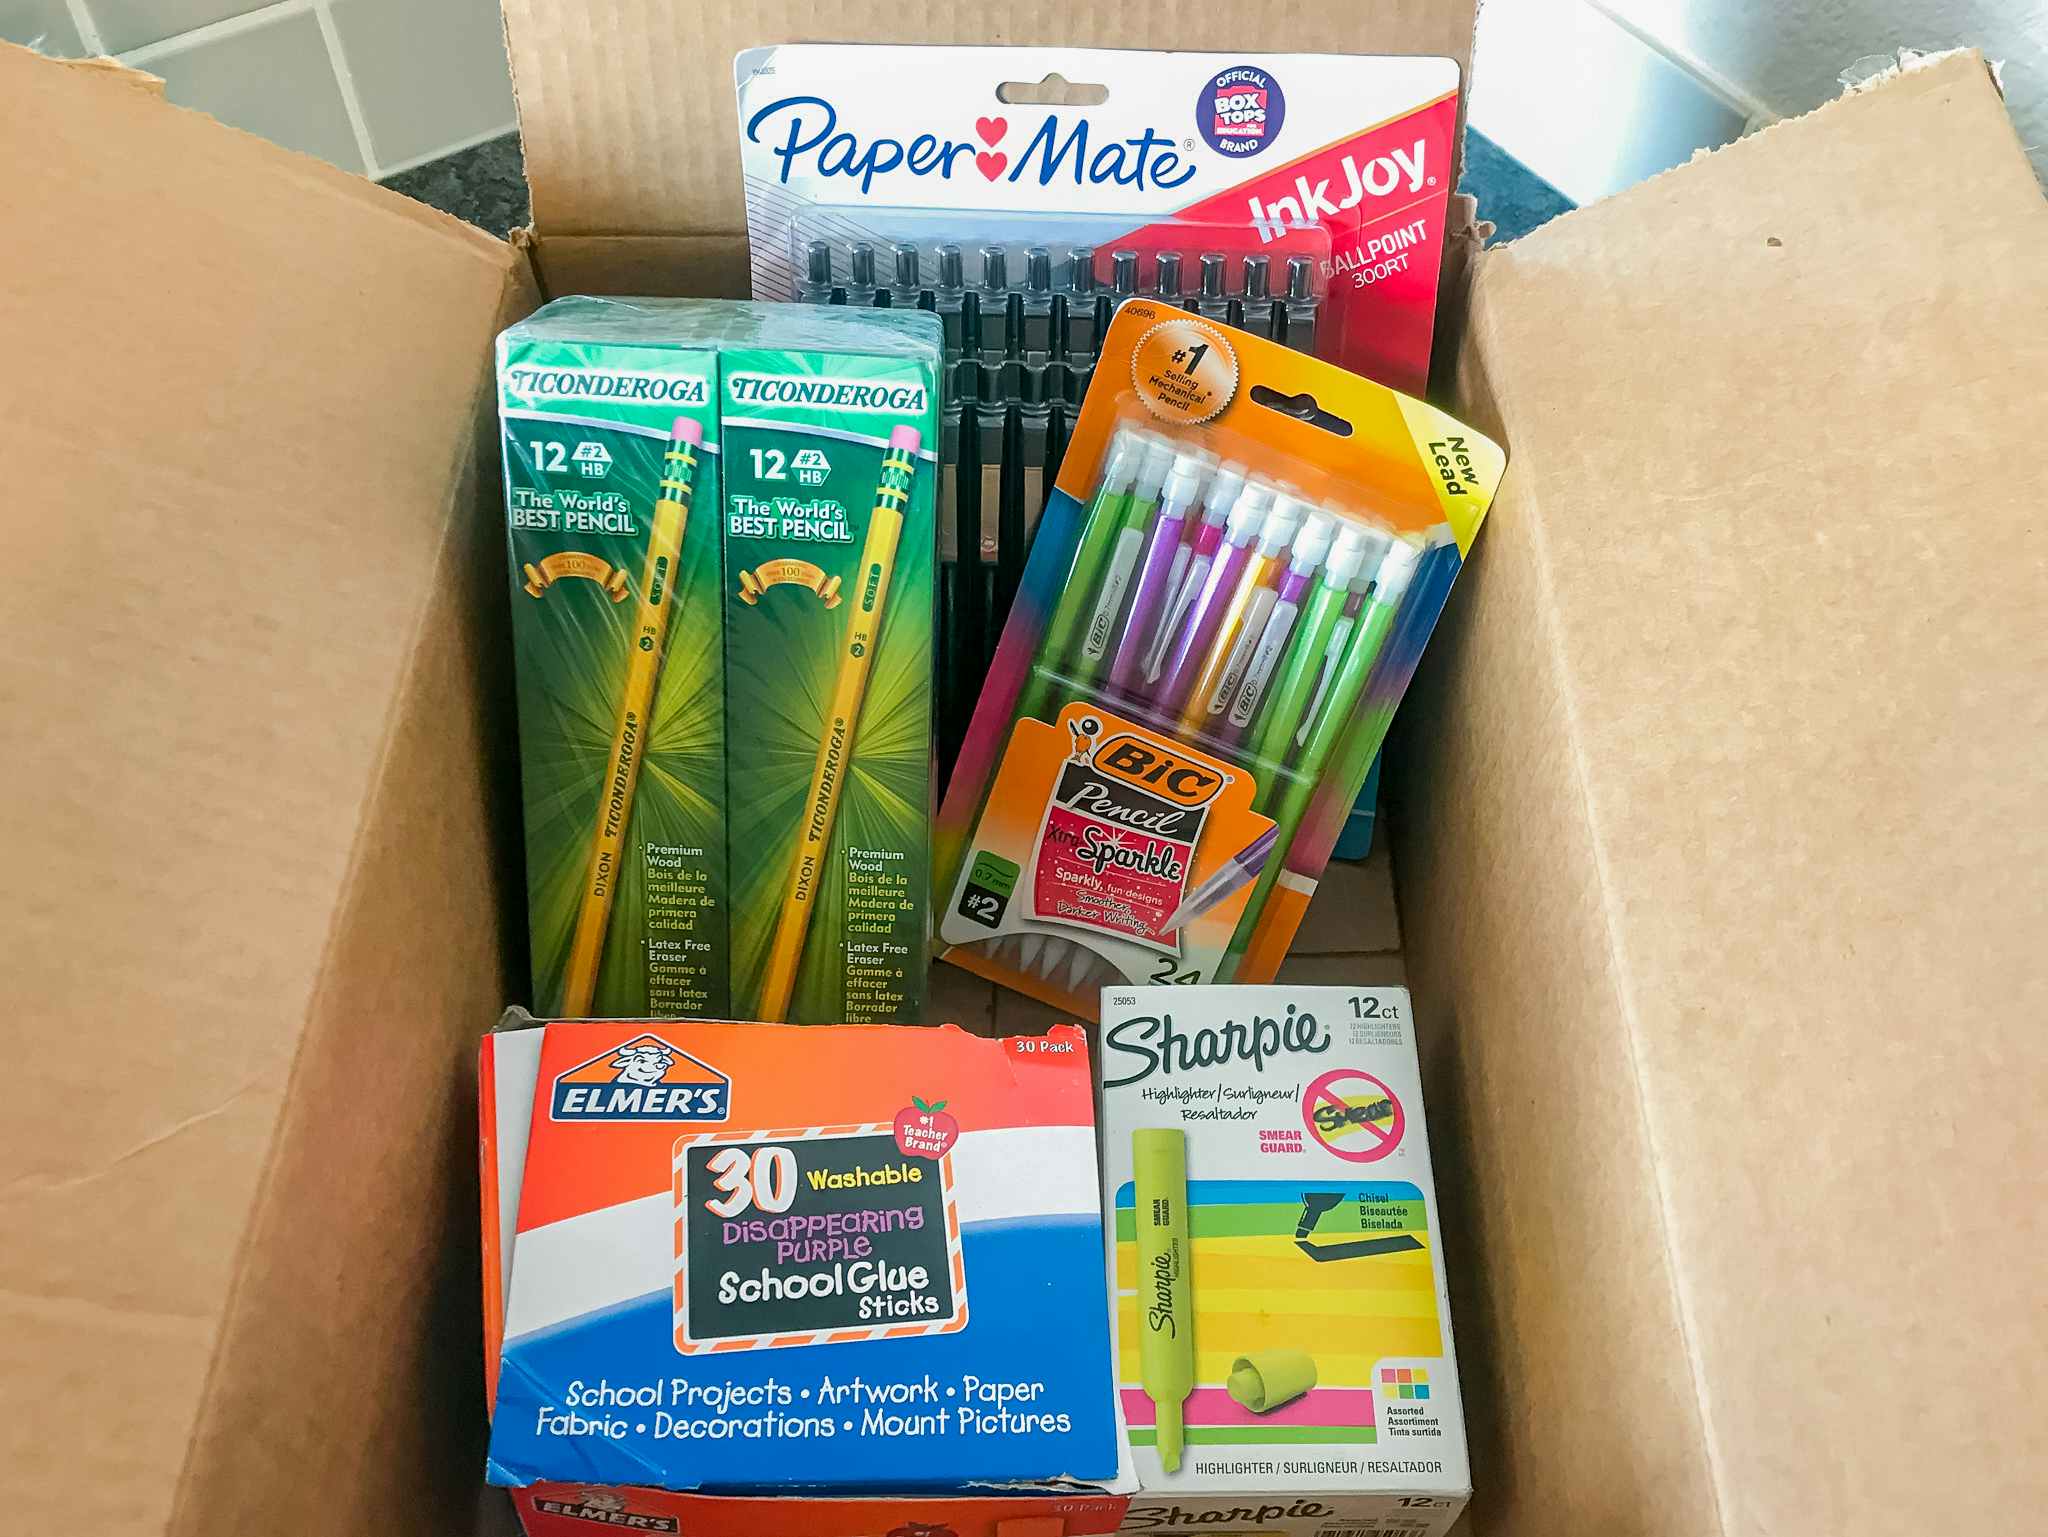 https://prod-cdn-thekrazycouponlady.imgix.net/wp-content/uploads/2022/07/amazon-back-to-school-teacher-prime-day-office-supplies-pencils-pens-highlighters-elmers-glue-reuploaded-2022-1657483702-1657483703.jpg?auto=format&fit=fill&q=25